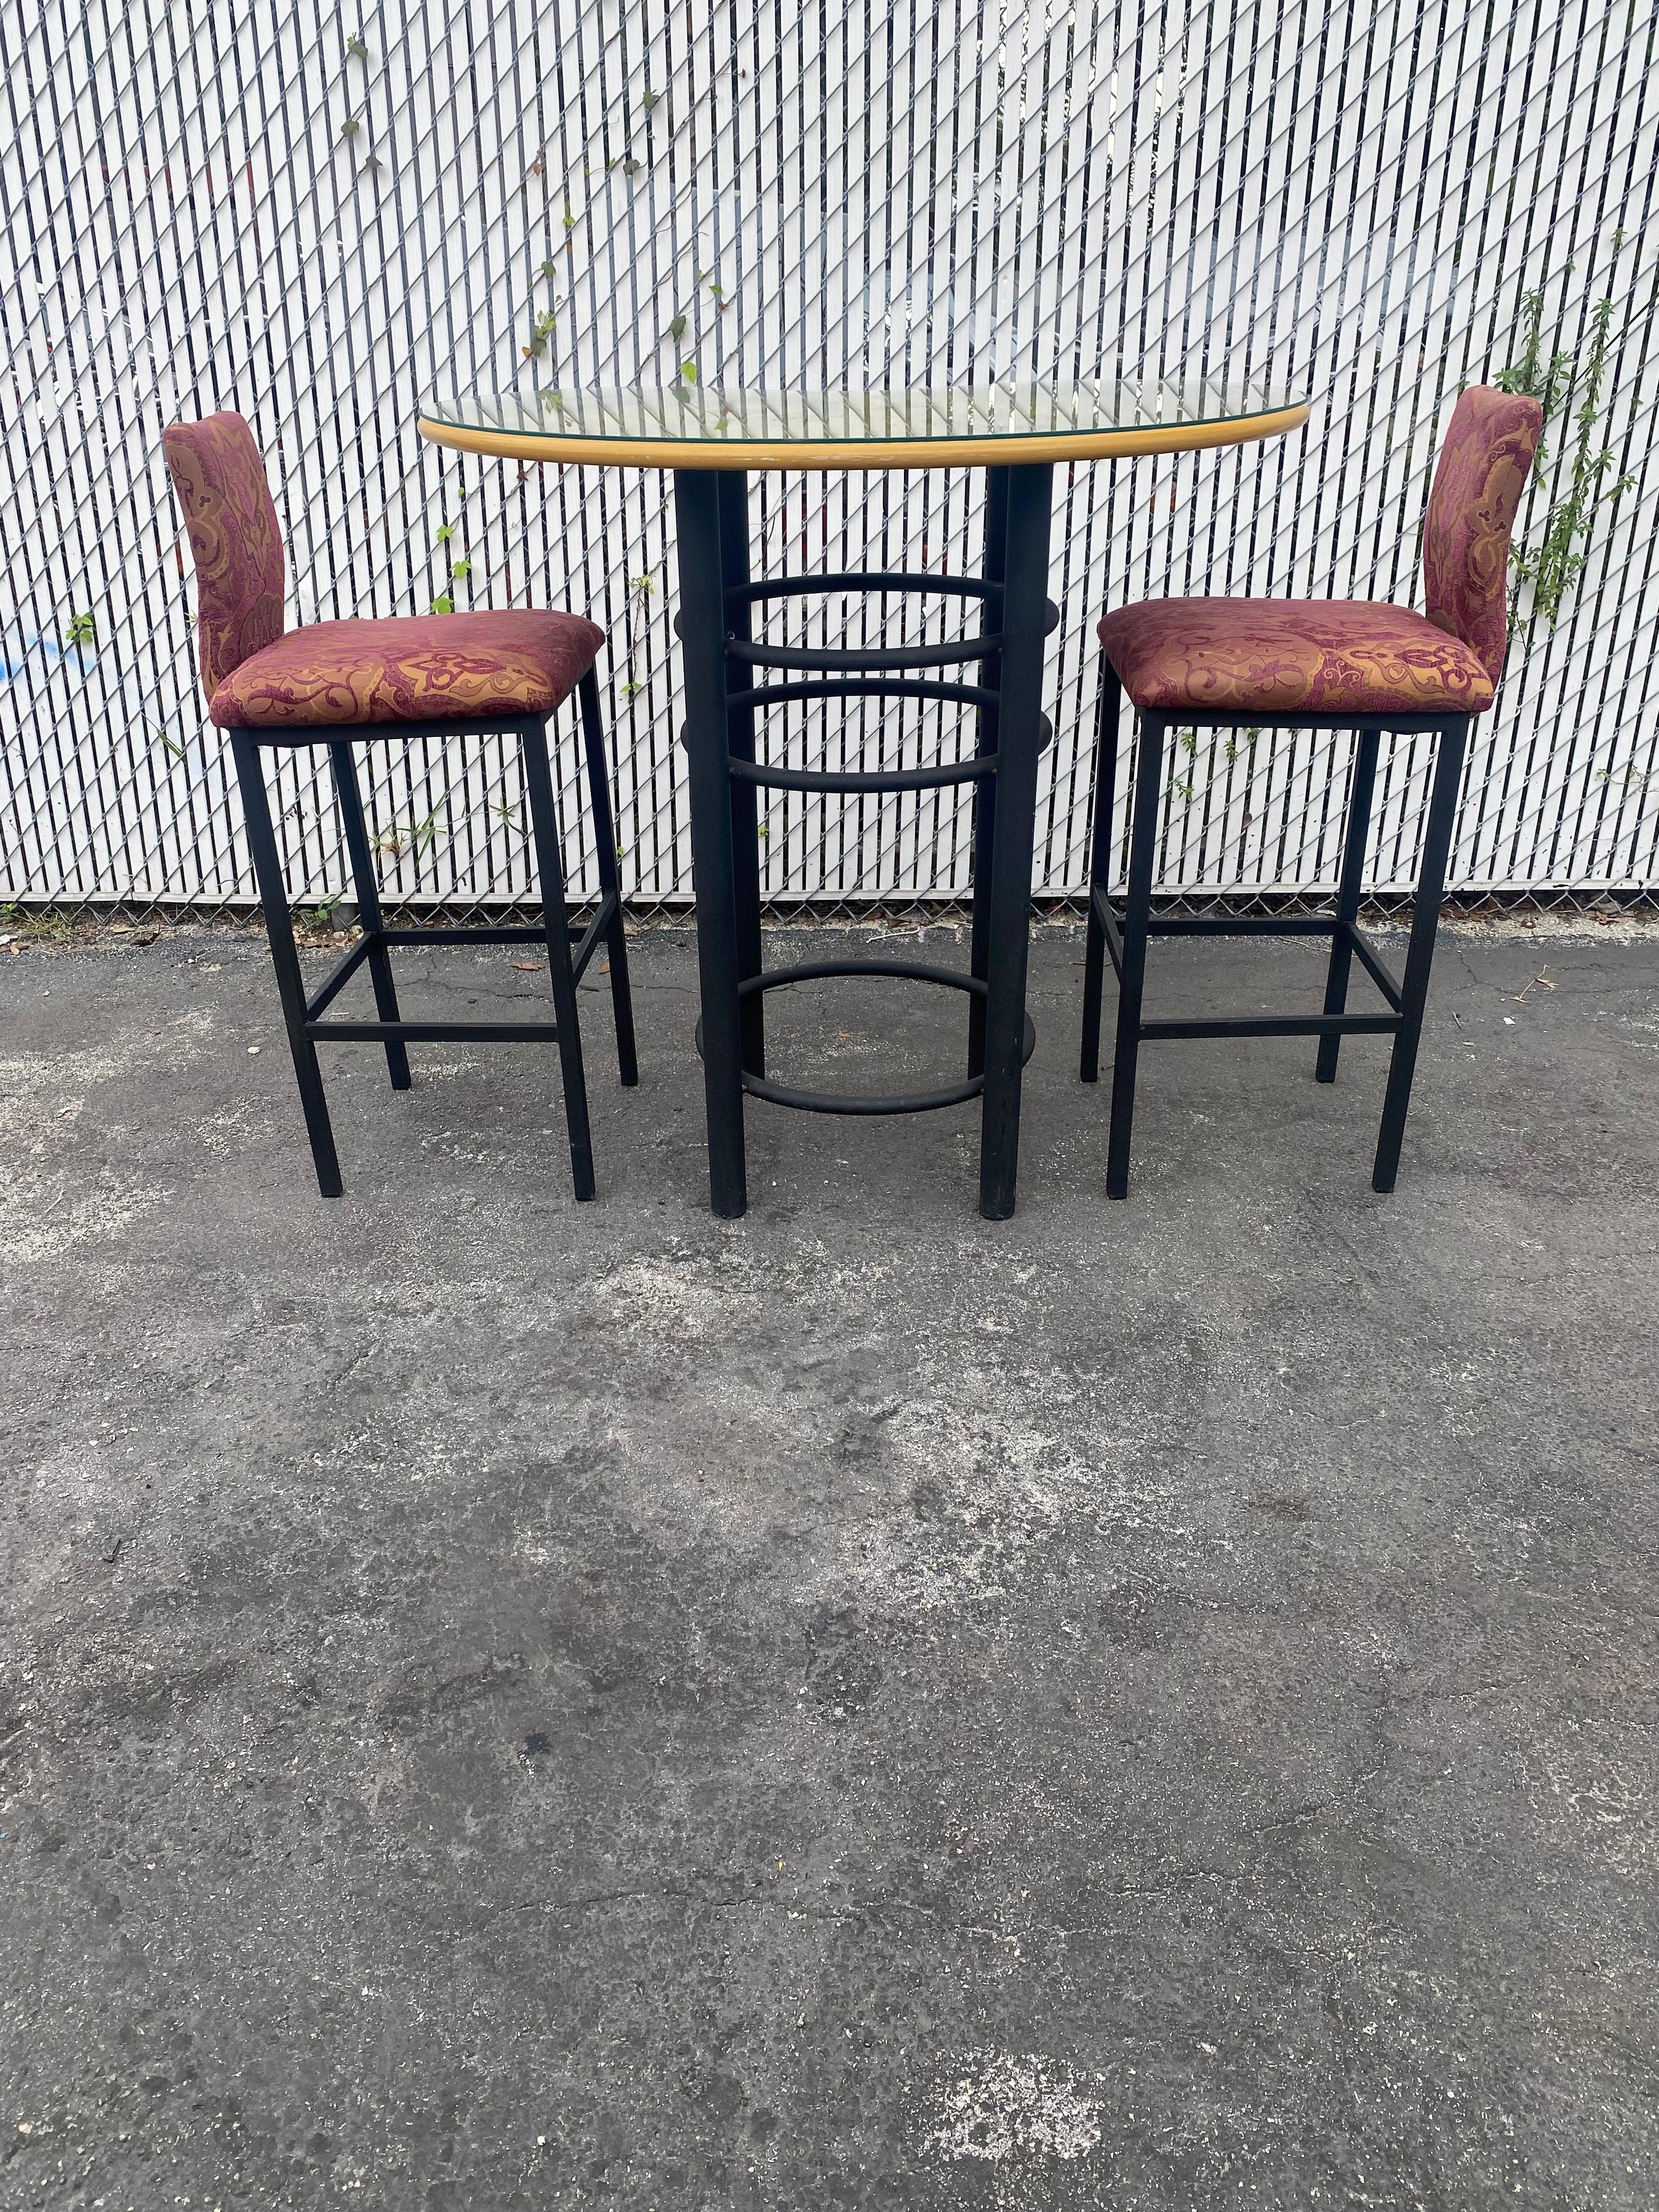 1980s Artistic Kidney Bar Pub Dining Table and Chairs, Set of 3 In Good Condition For Sale In Fort Lauderdale, FL